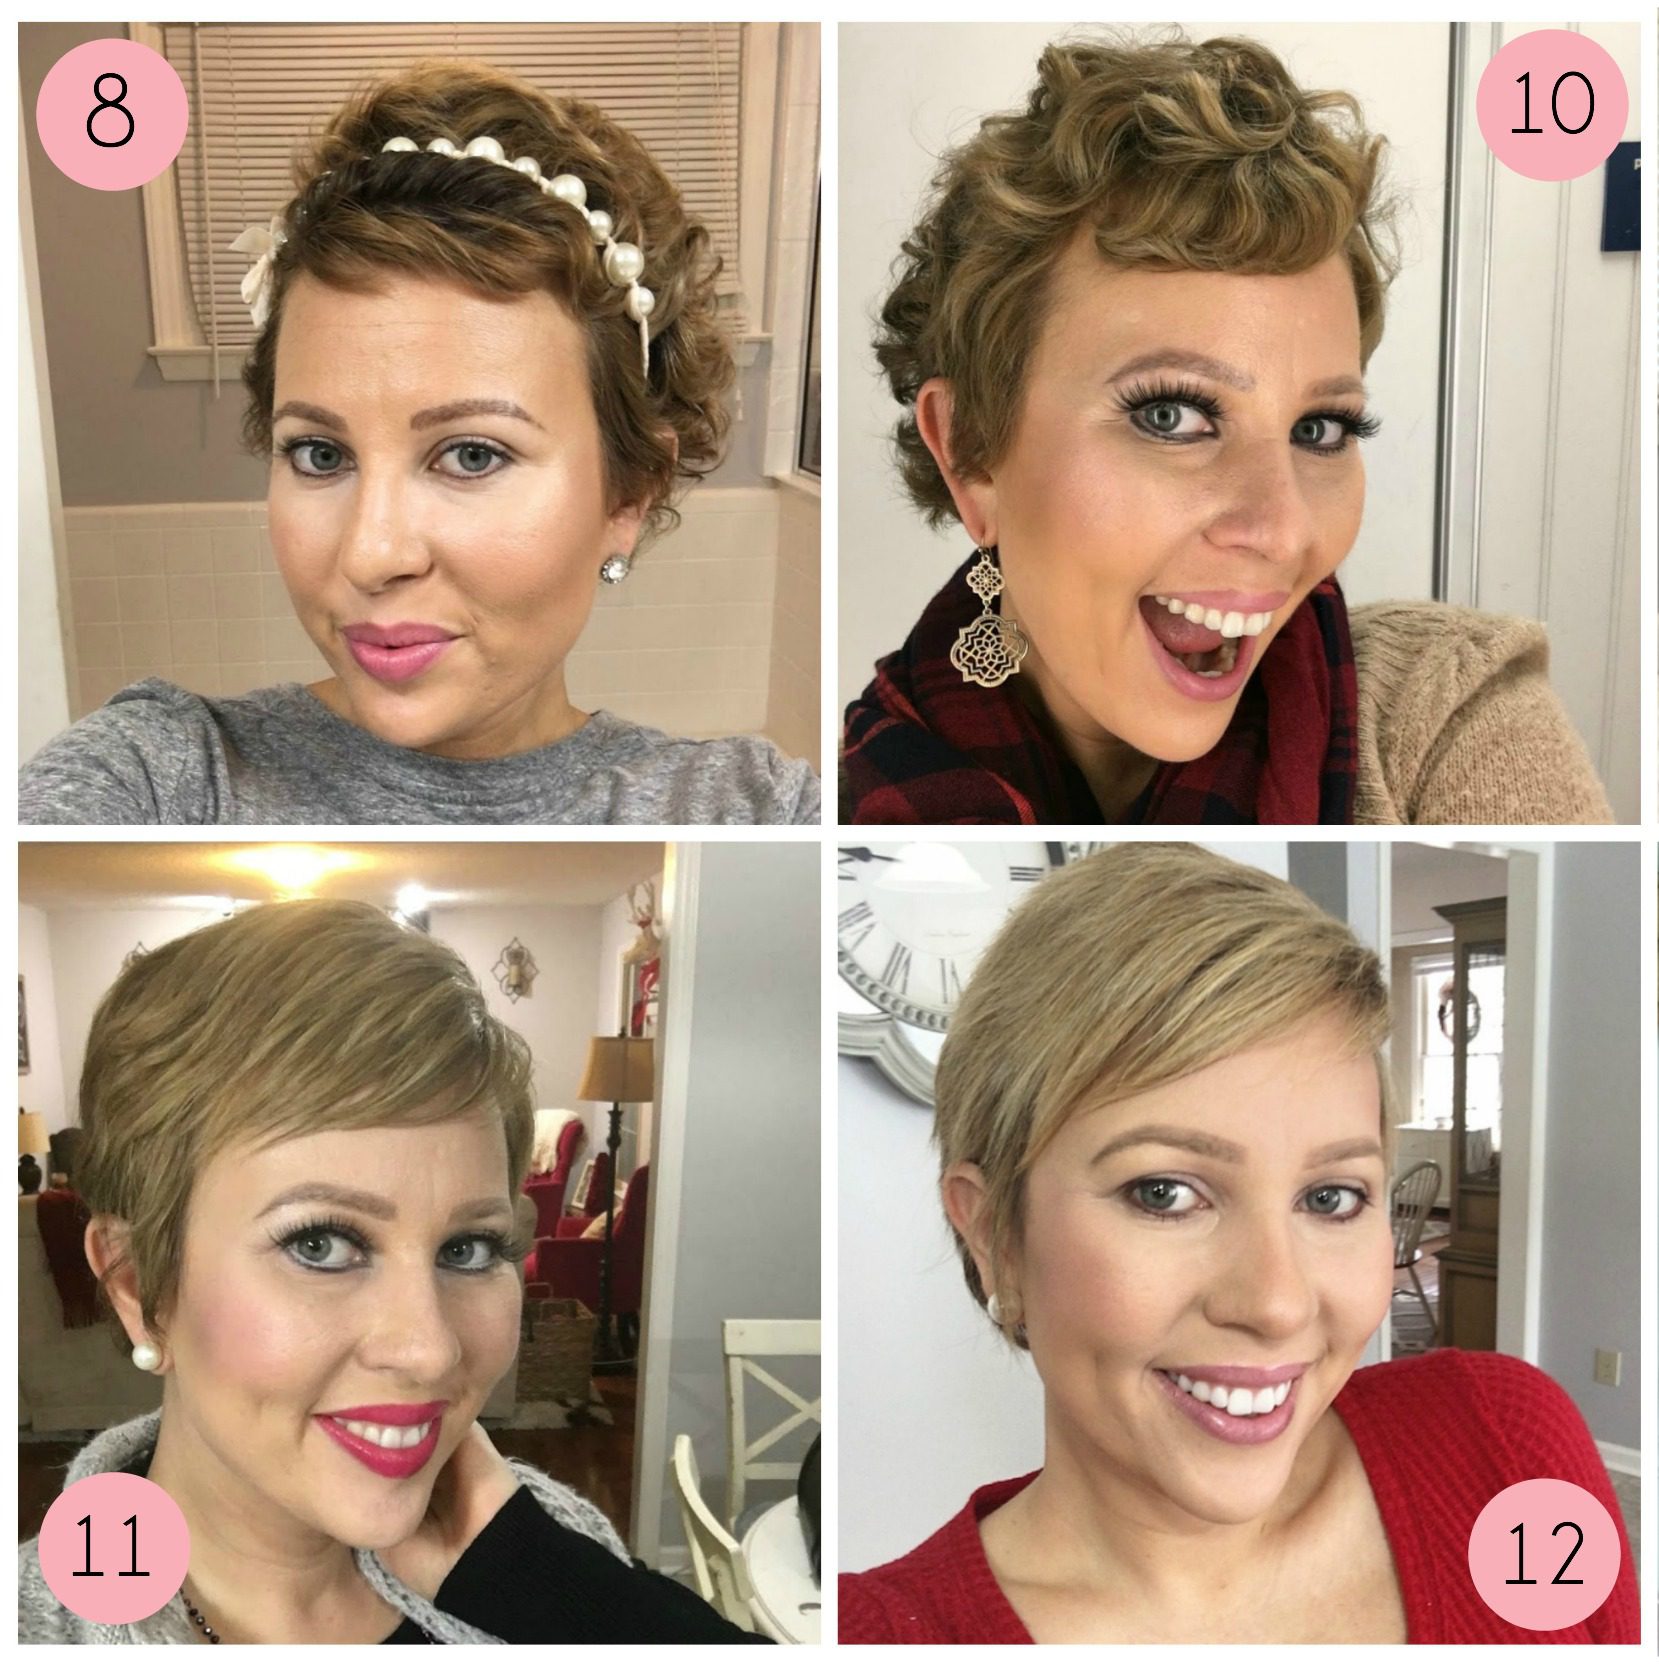 Hair Growth & Styling Tips for Short Hair After Chemo - My Cancer Chic